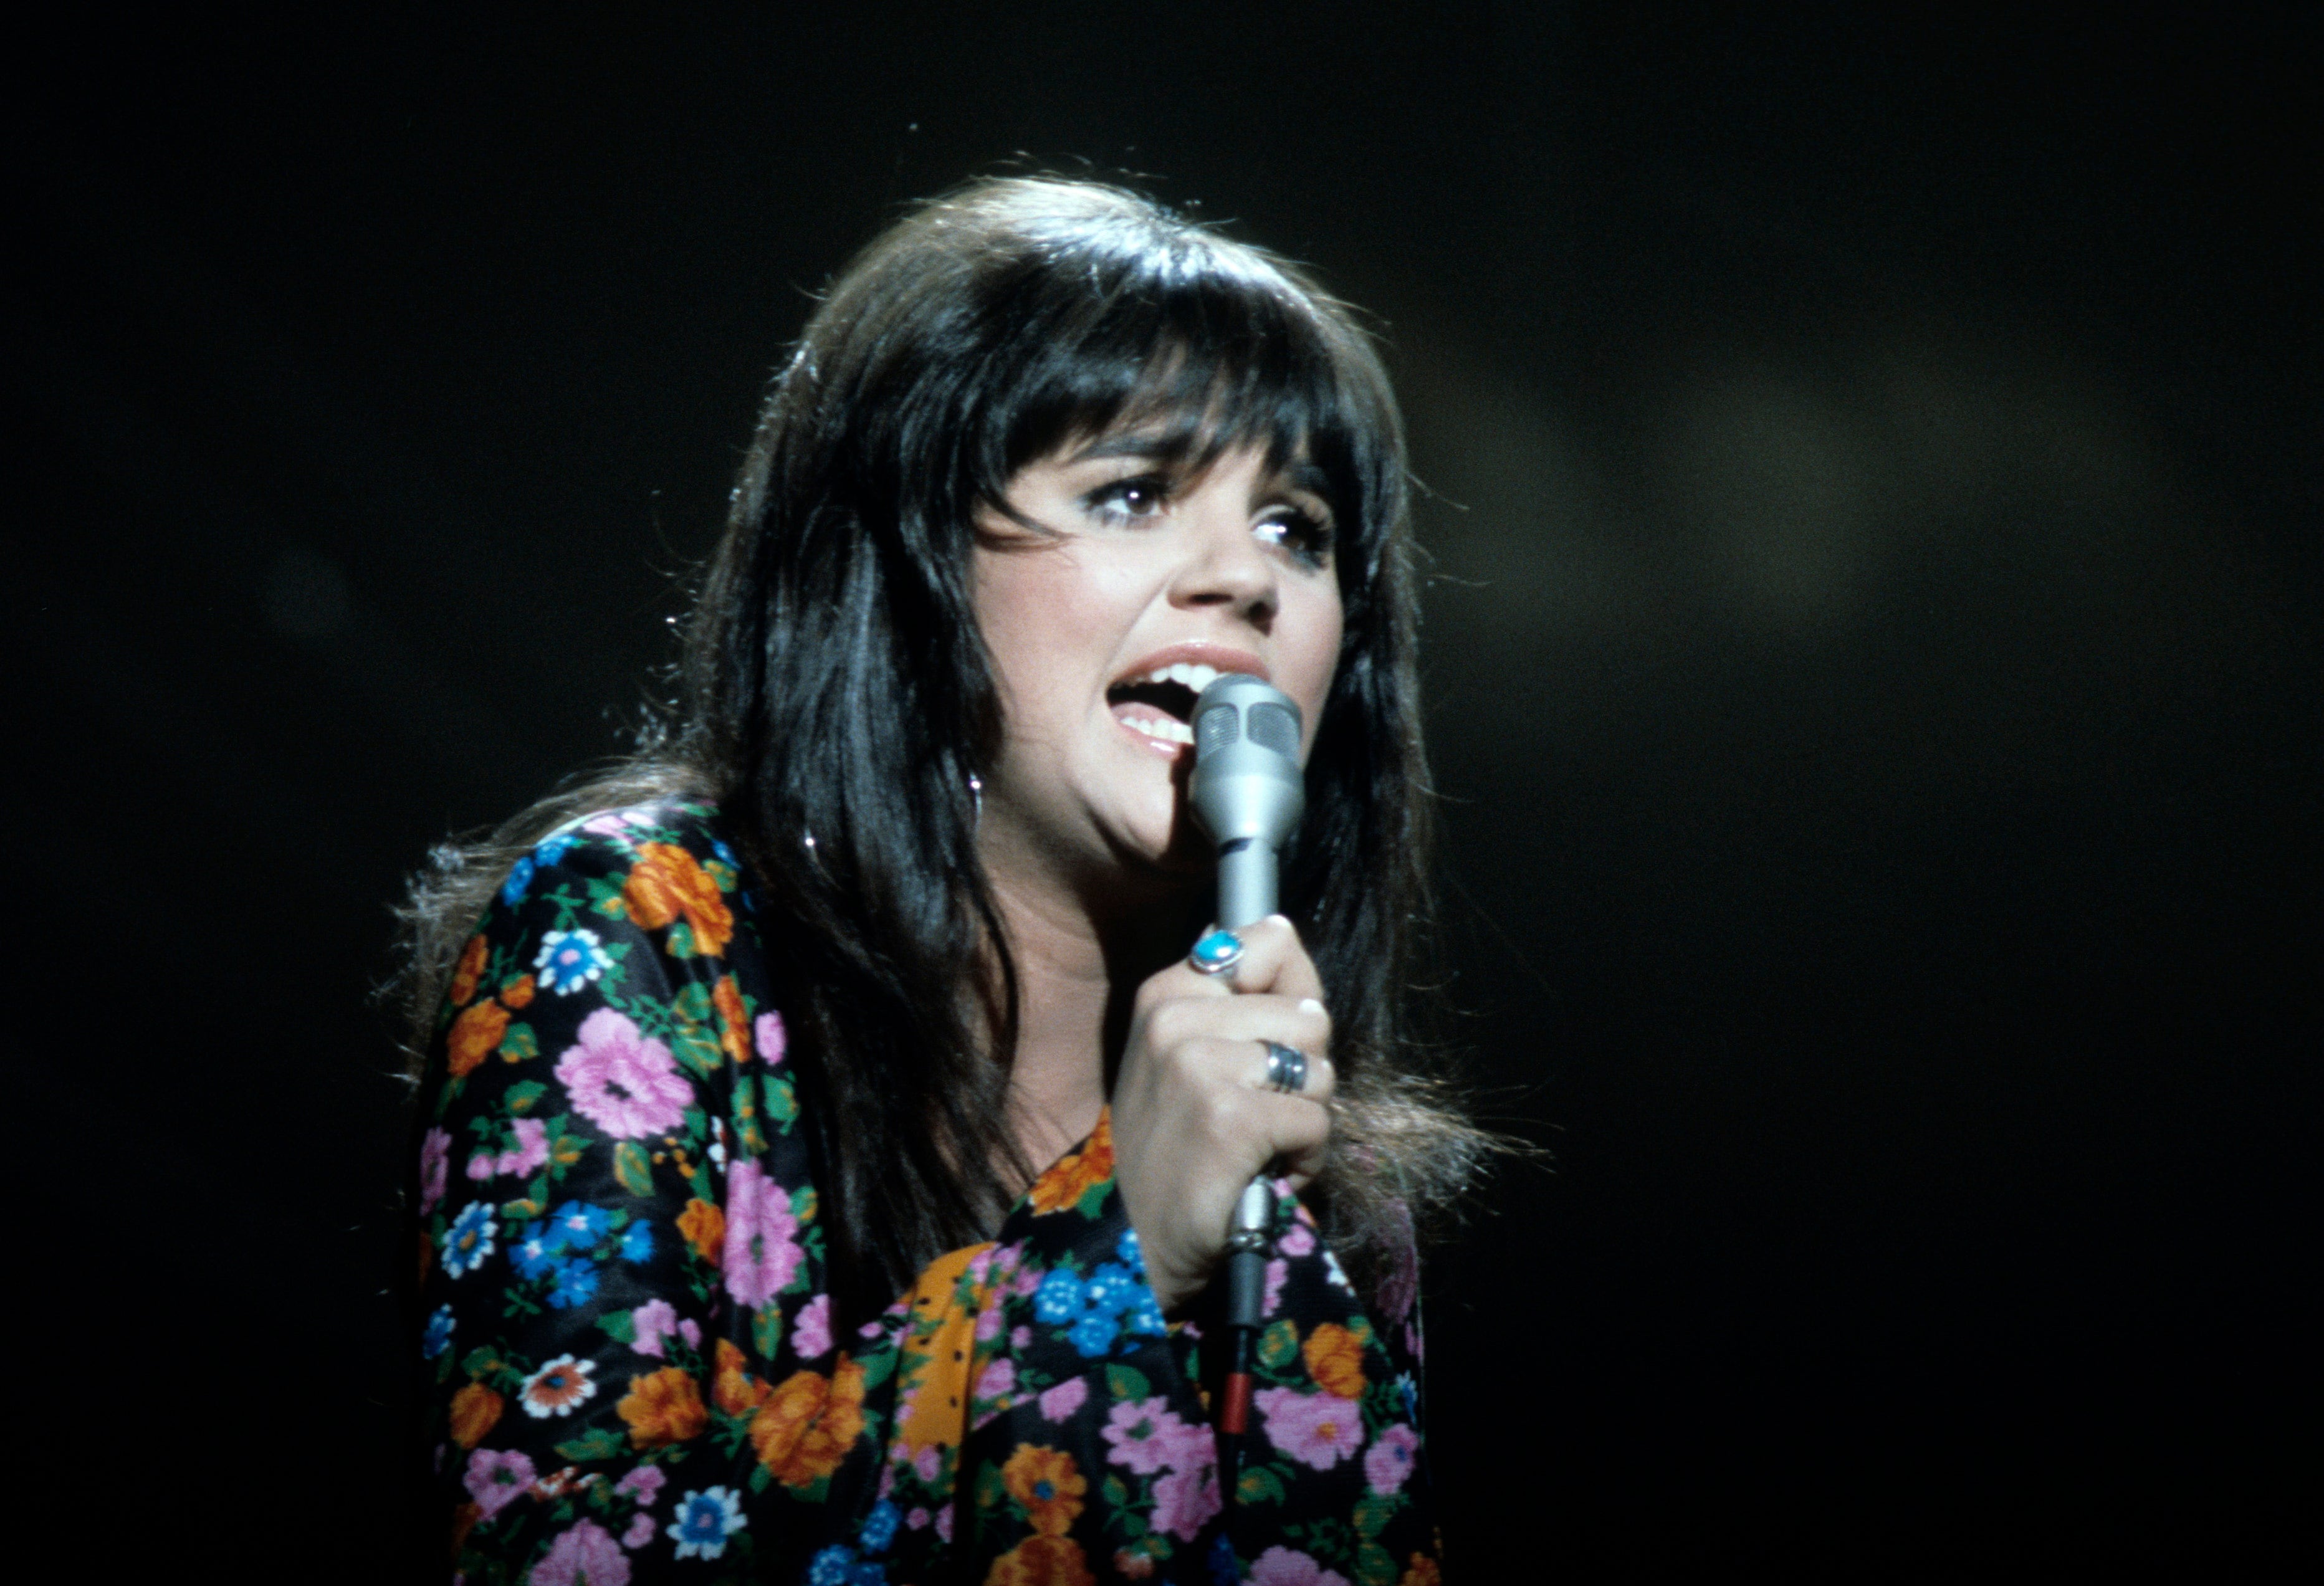 ‘The Last of Us’ gives Linda Ronstadt song ‘Long, Long Time’ new life